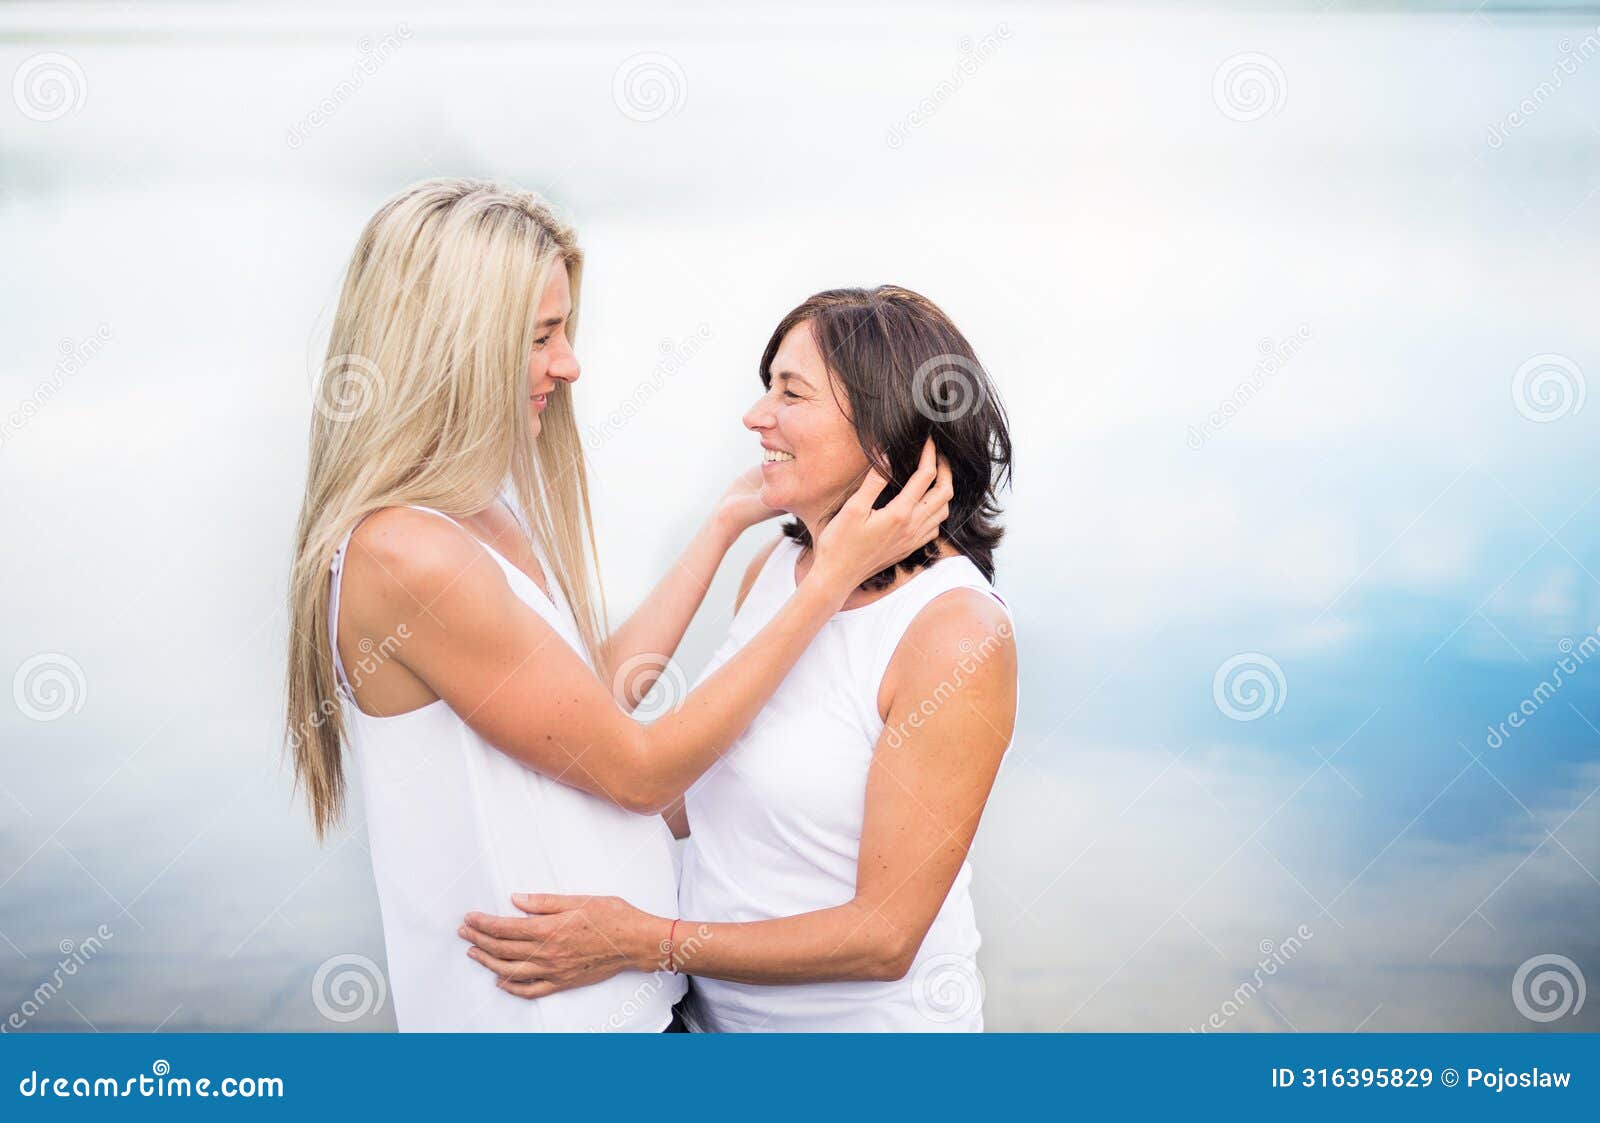 adult daughter spending time with her mother outdoors. beautiful daughter holding each other lovingly, hugging